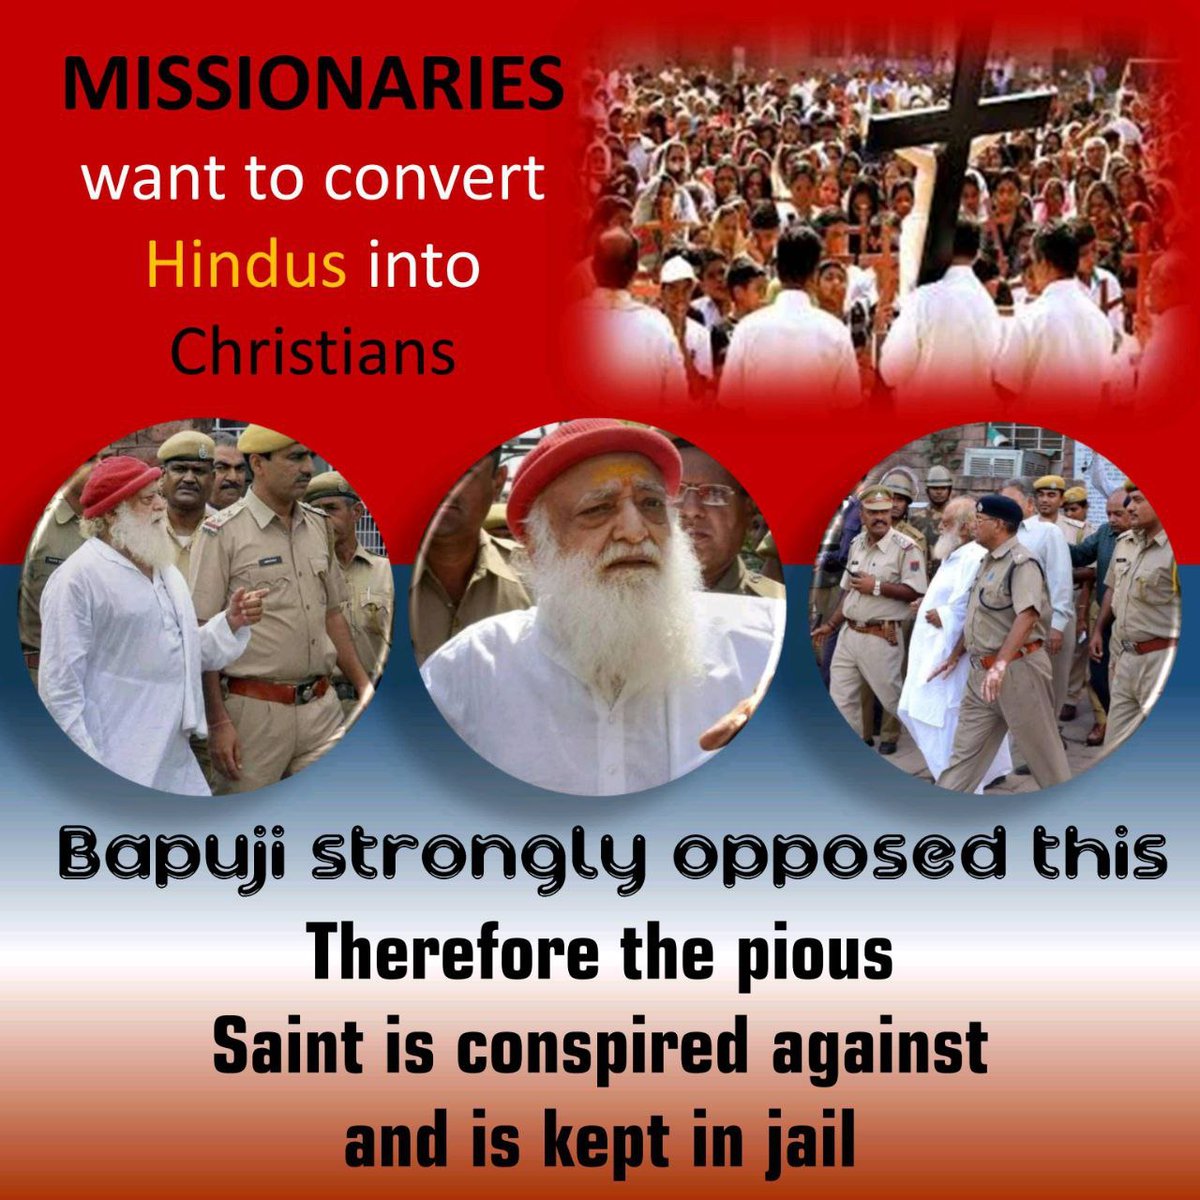 Sant Shri Asharamji Bapu Played major role of 
#RoadBlockToConversion
He realised The danger of conversion thus conducted shivir all over the country, made donations & did Ghar Vapasi of poor innocent Hindus. This is the main Cause of Conspiracy against Guruji.